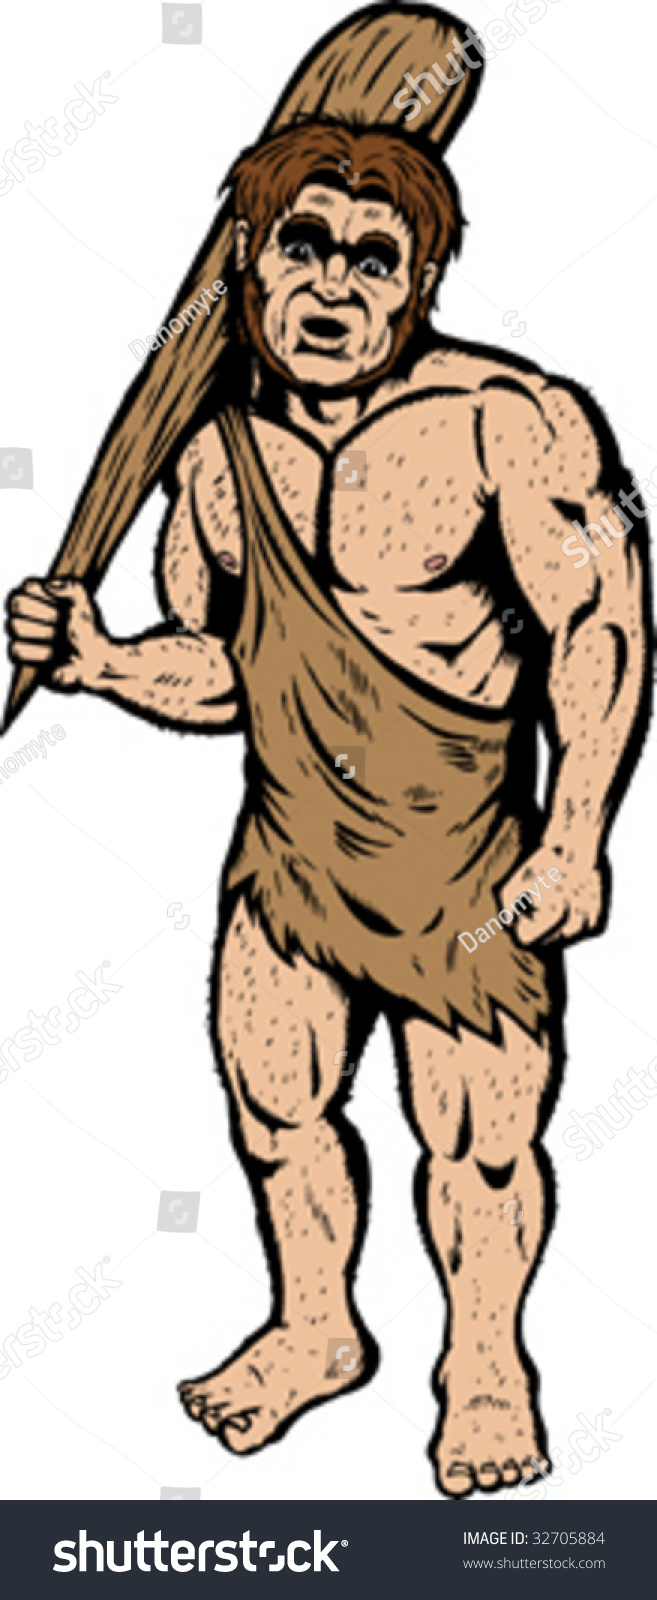 Caveman Looking Very Confused. Stock Vector Illustration 32705884 ...